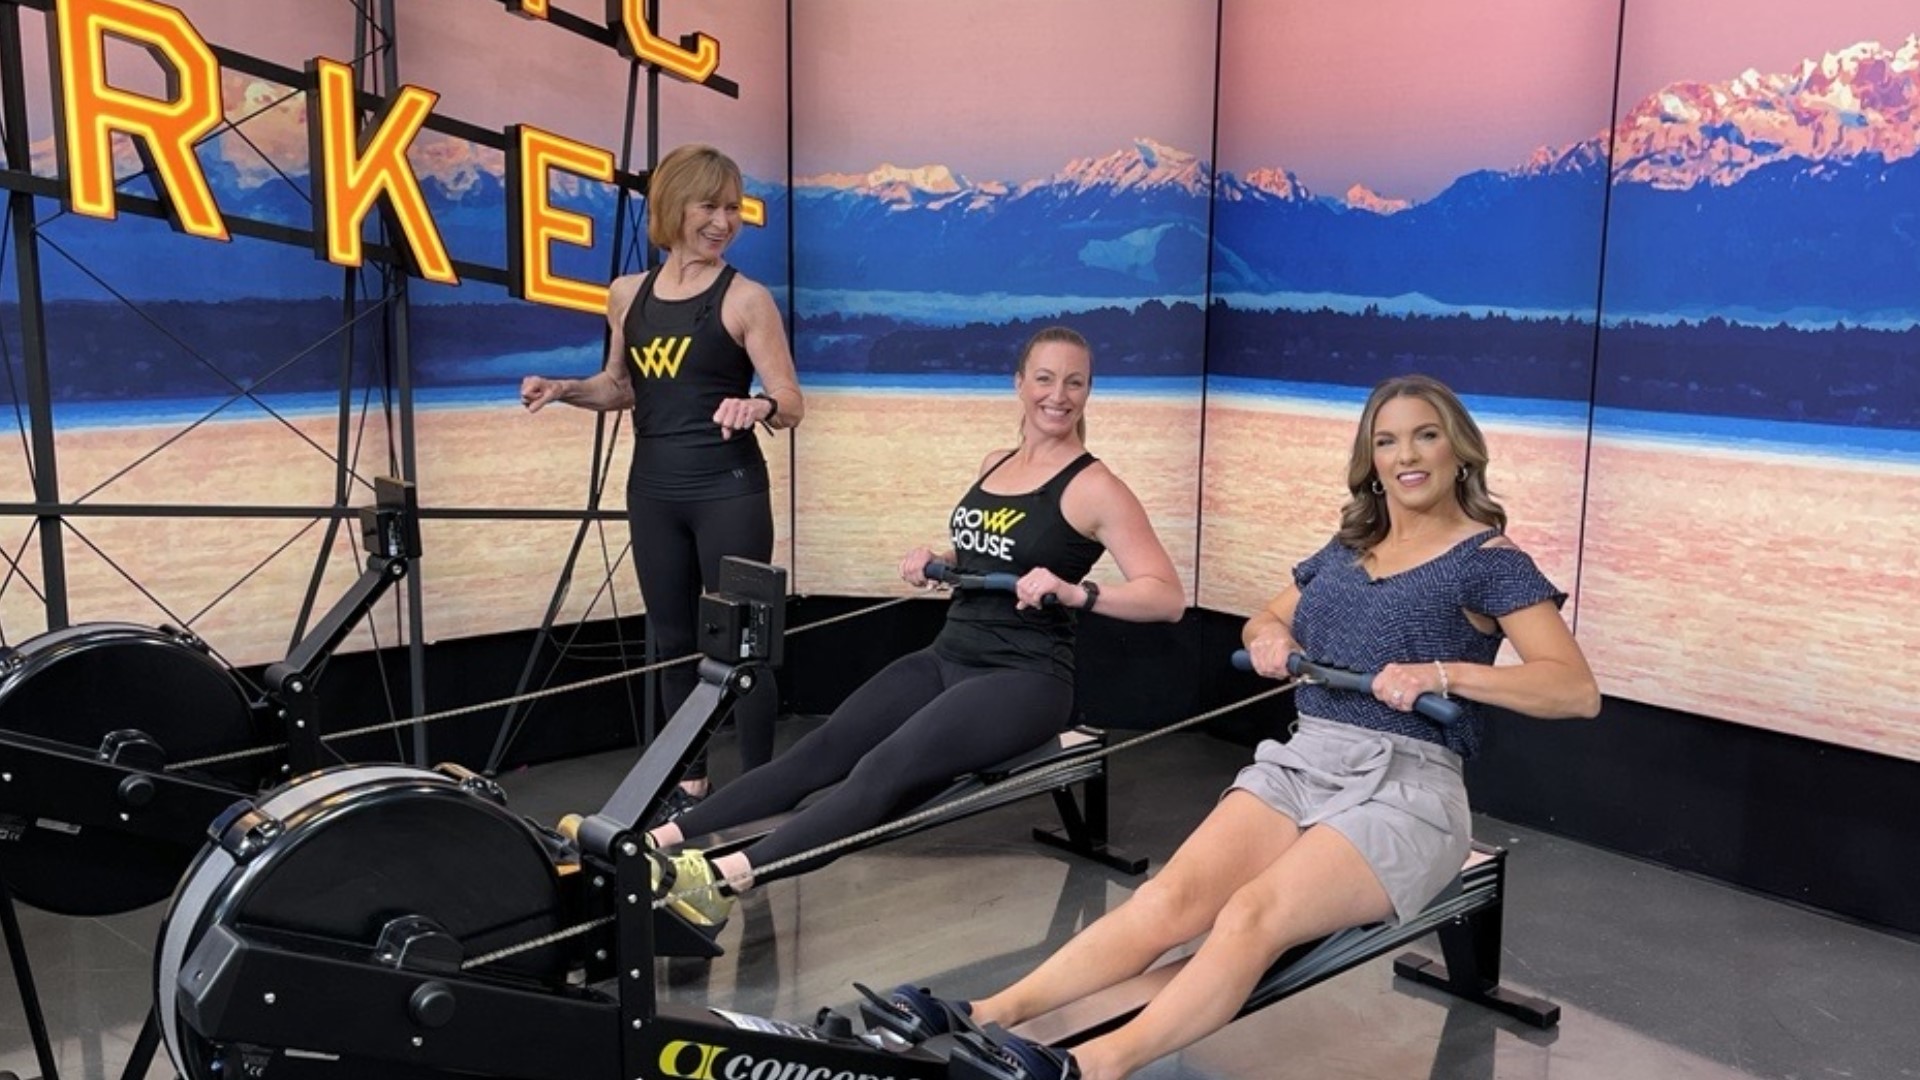 Susan Gehrke and Niki Combs from Row House Seattle share rowing tips and tricks for beginners.